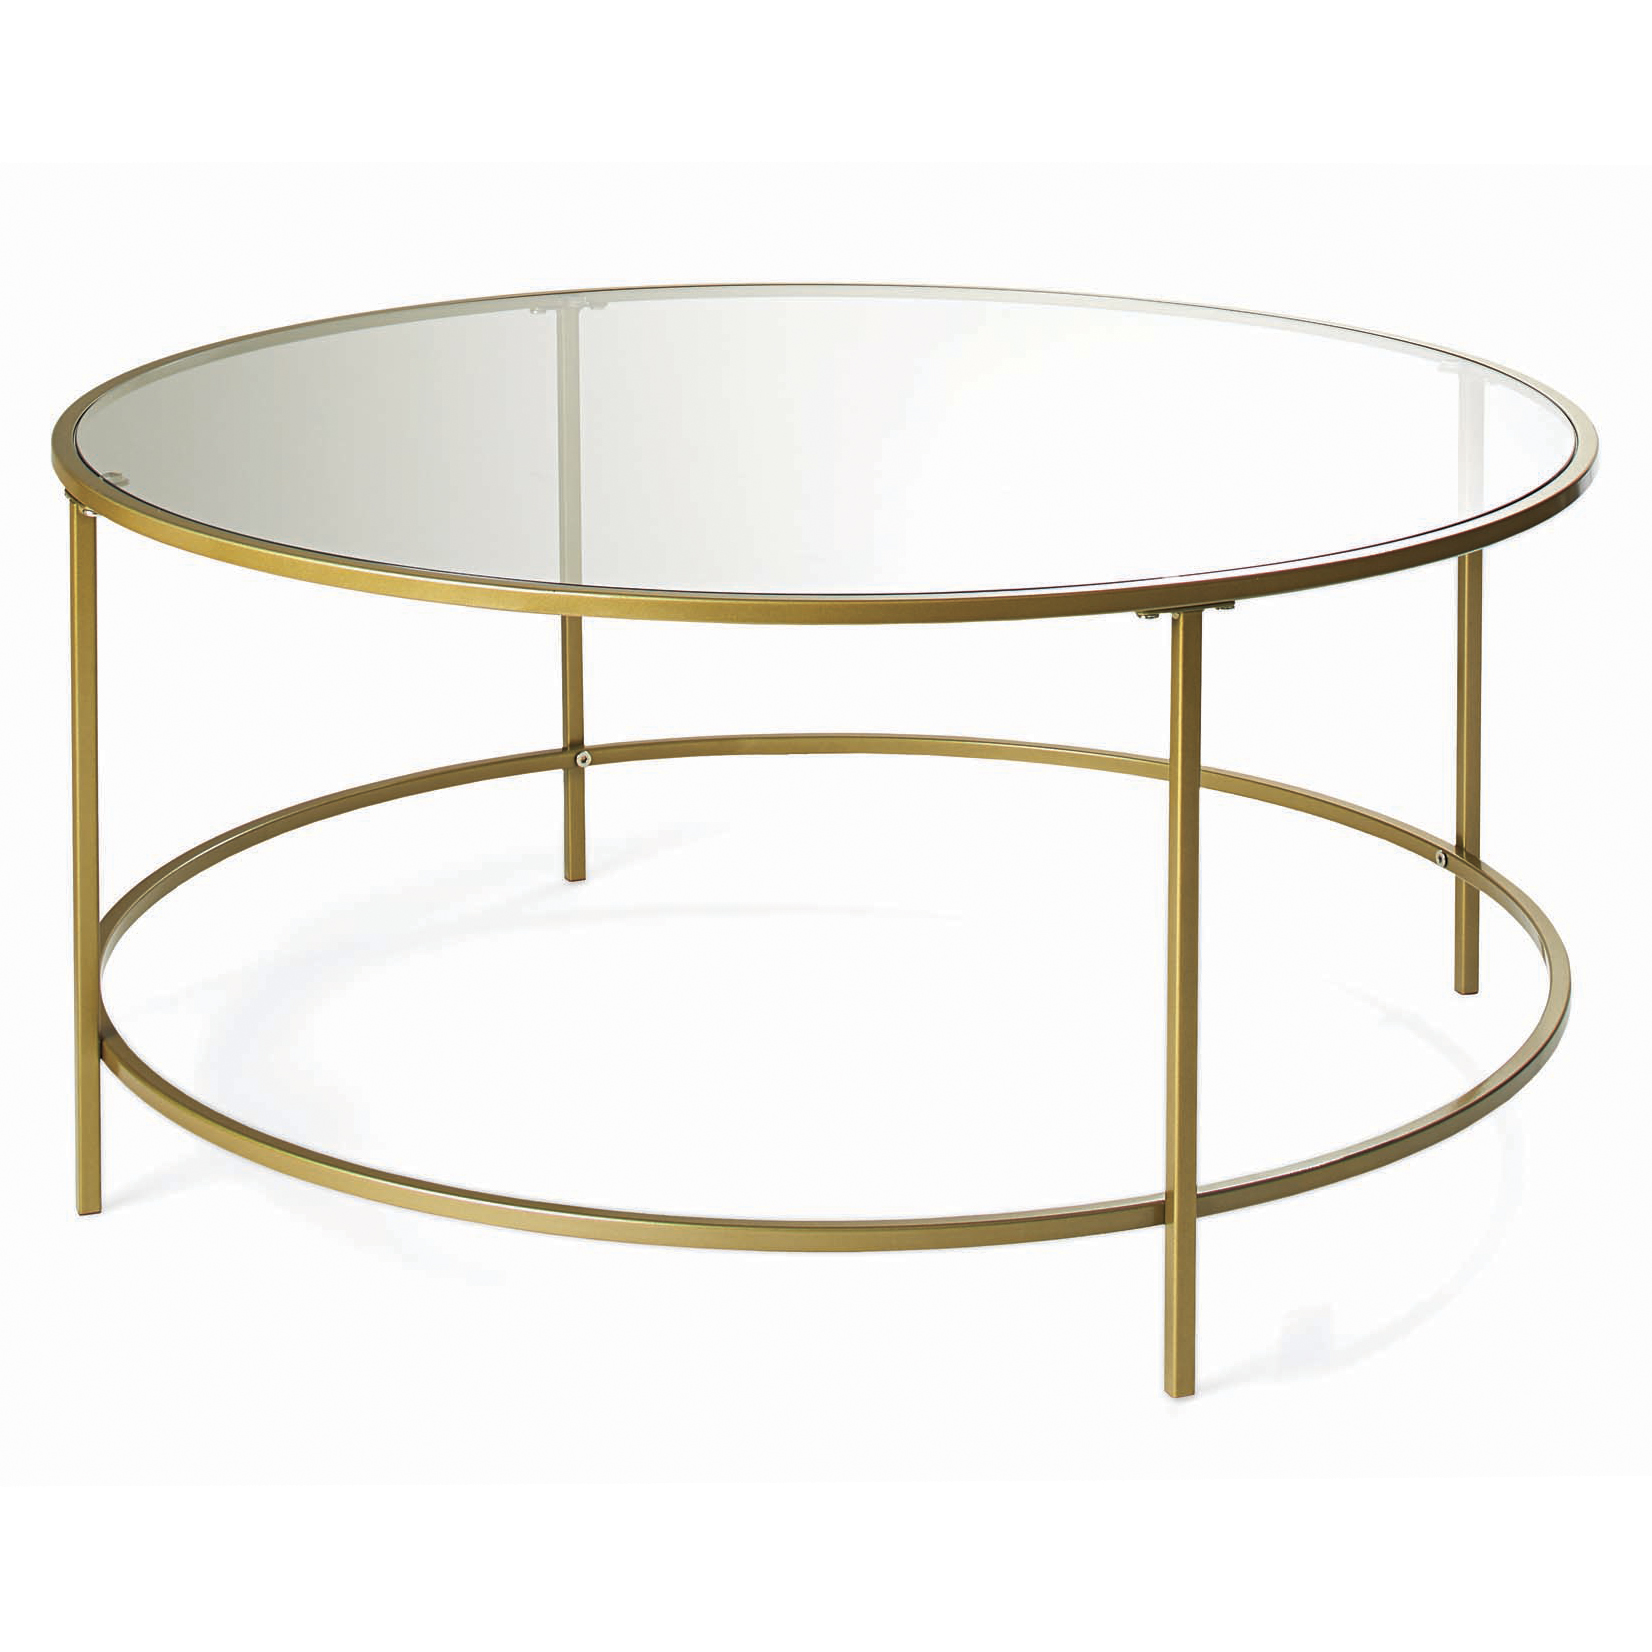 Better Homes & Gardens Nola Coffee Table, Gold Finish - image 5 of 10